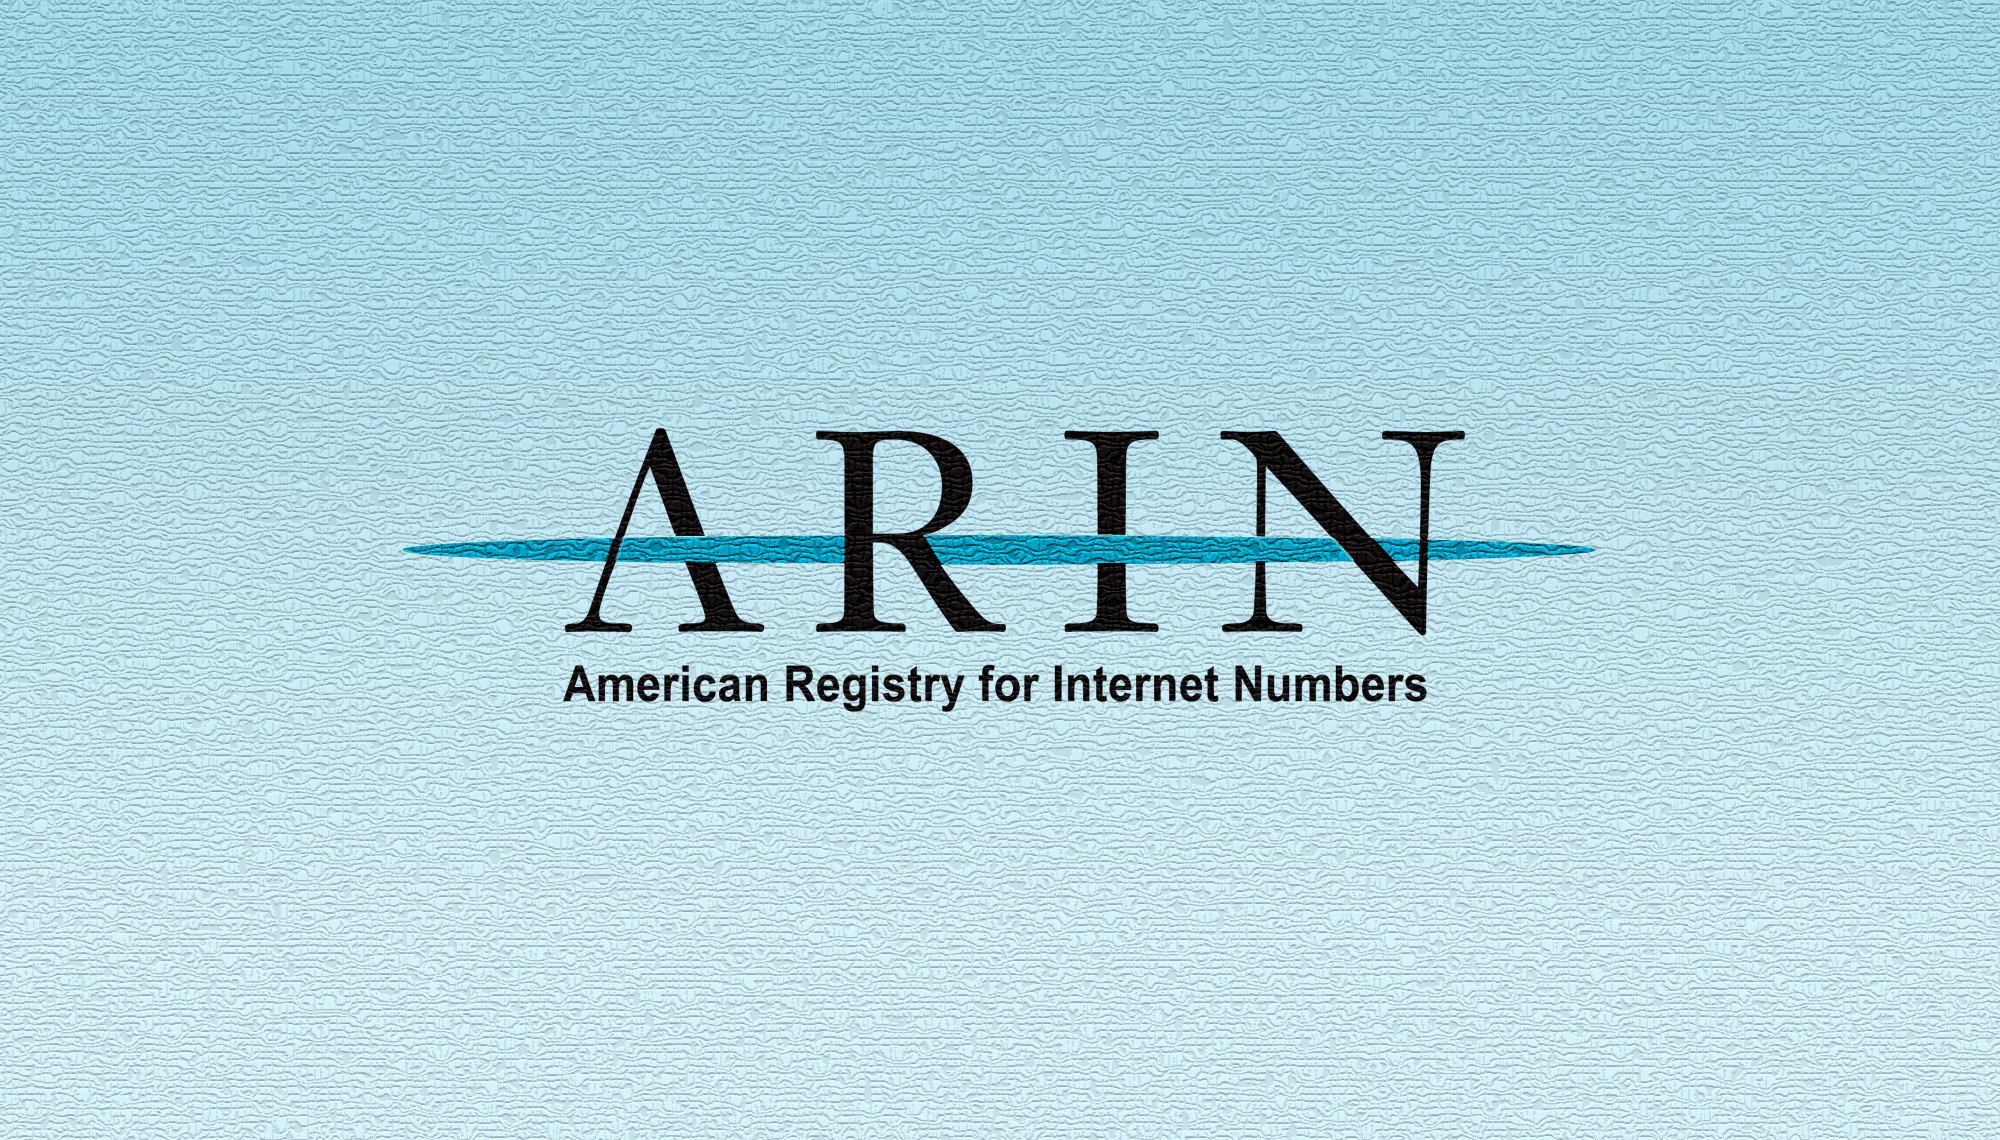 IPv6 Study Hall: How do I apply for IPv6 addresses from ARIN? Do I even qualify for an allocation?